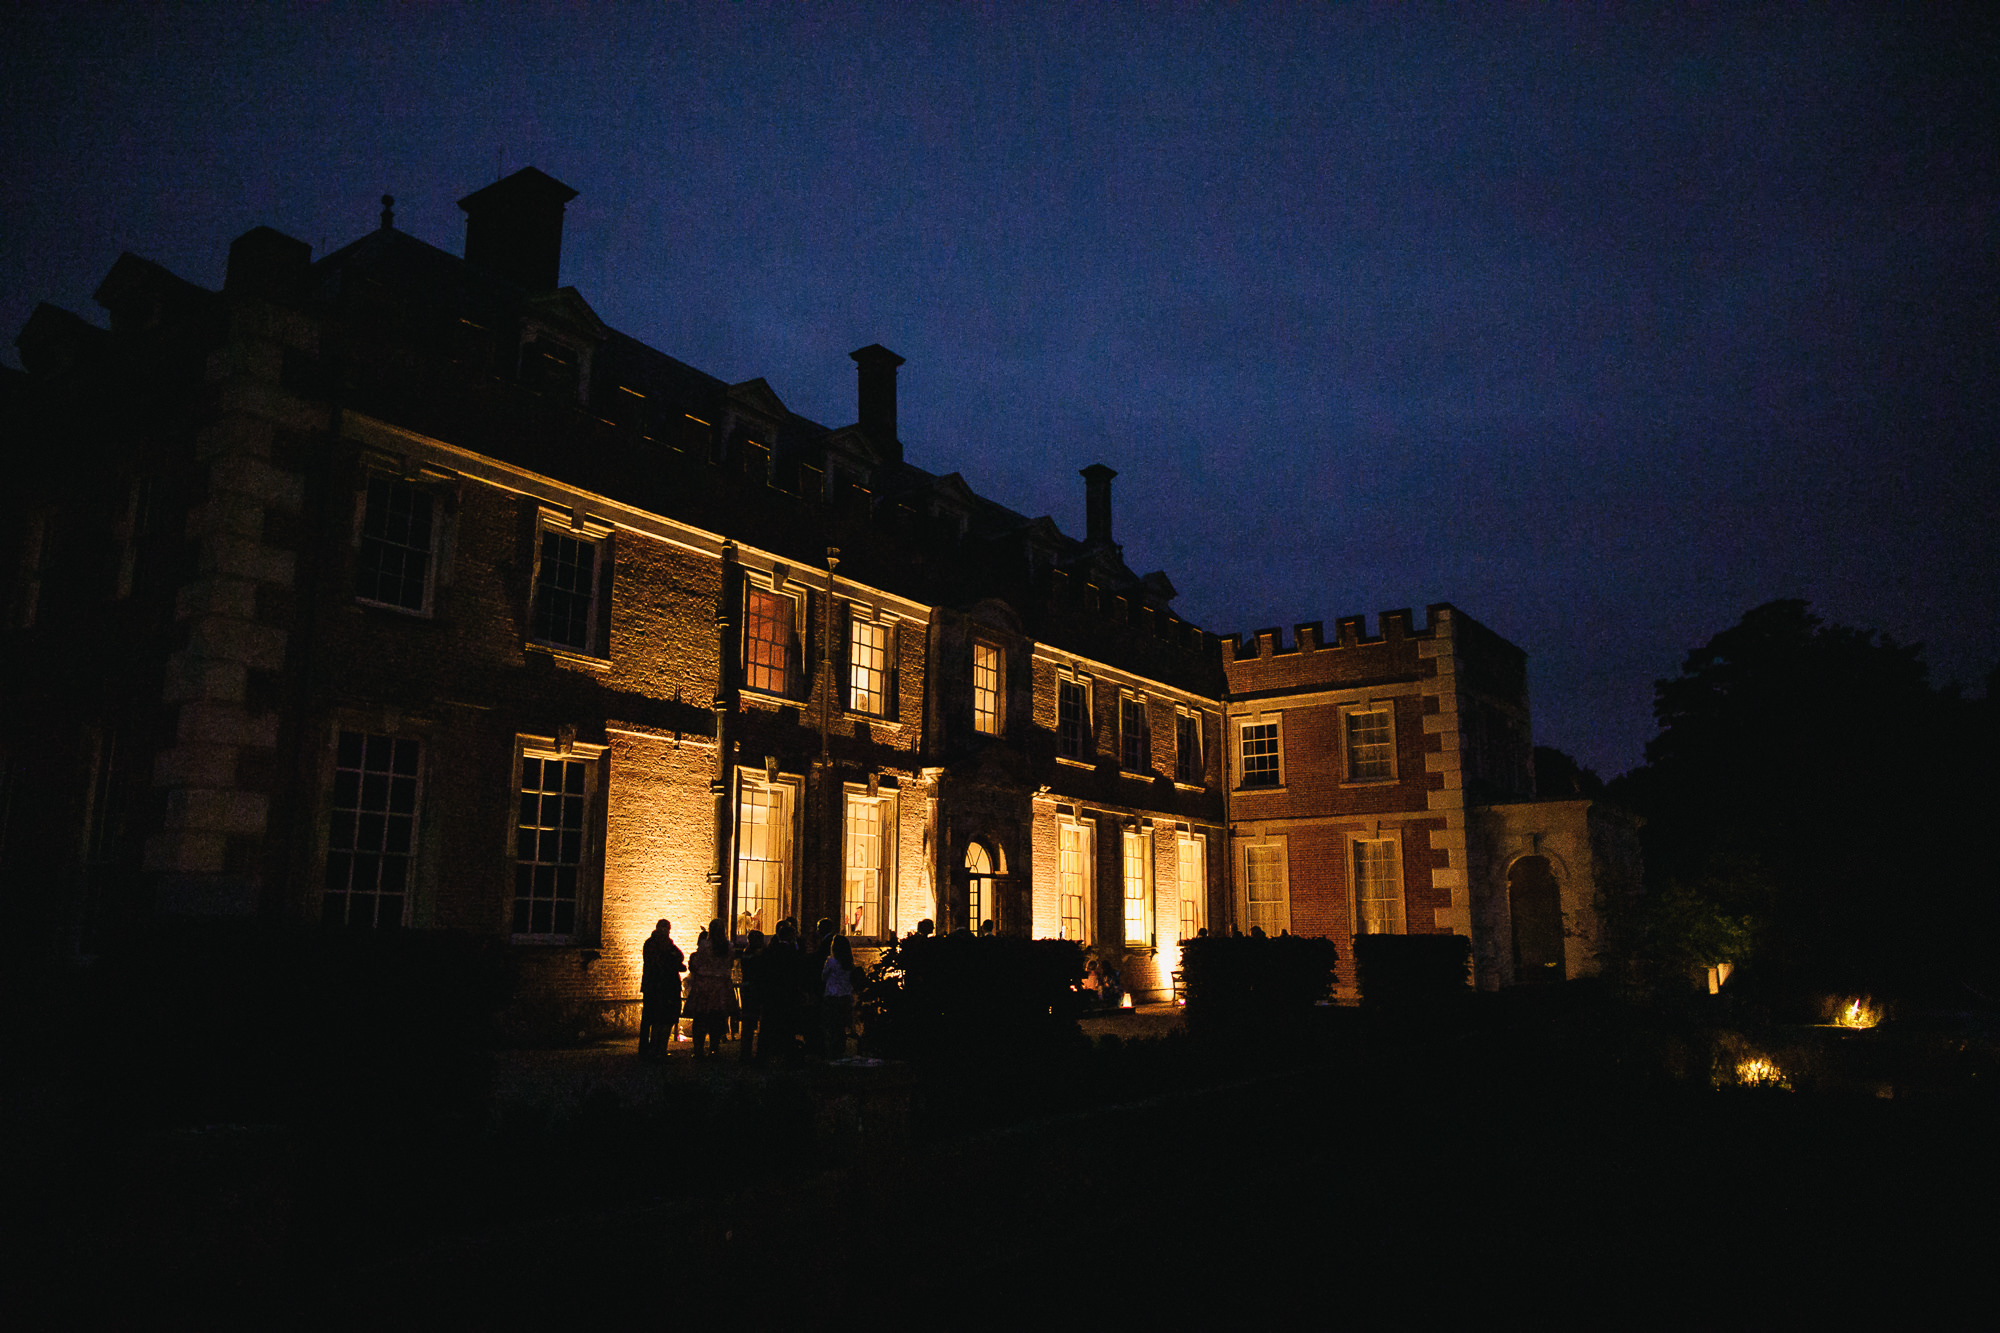 St Giles House at nighttime